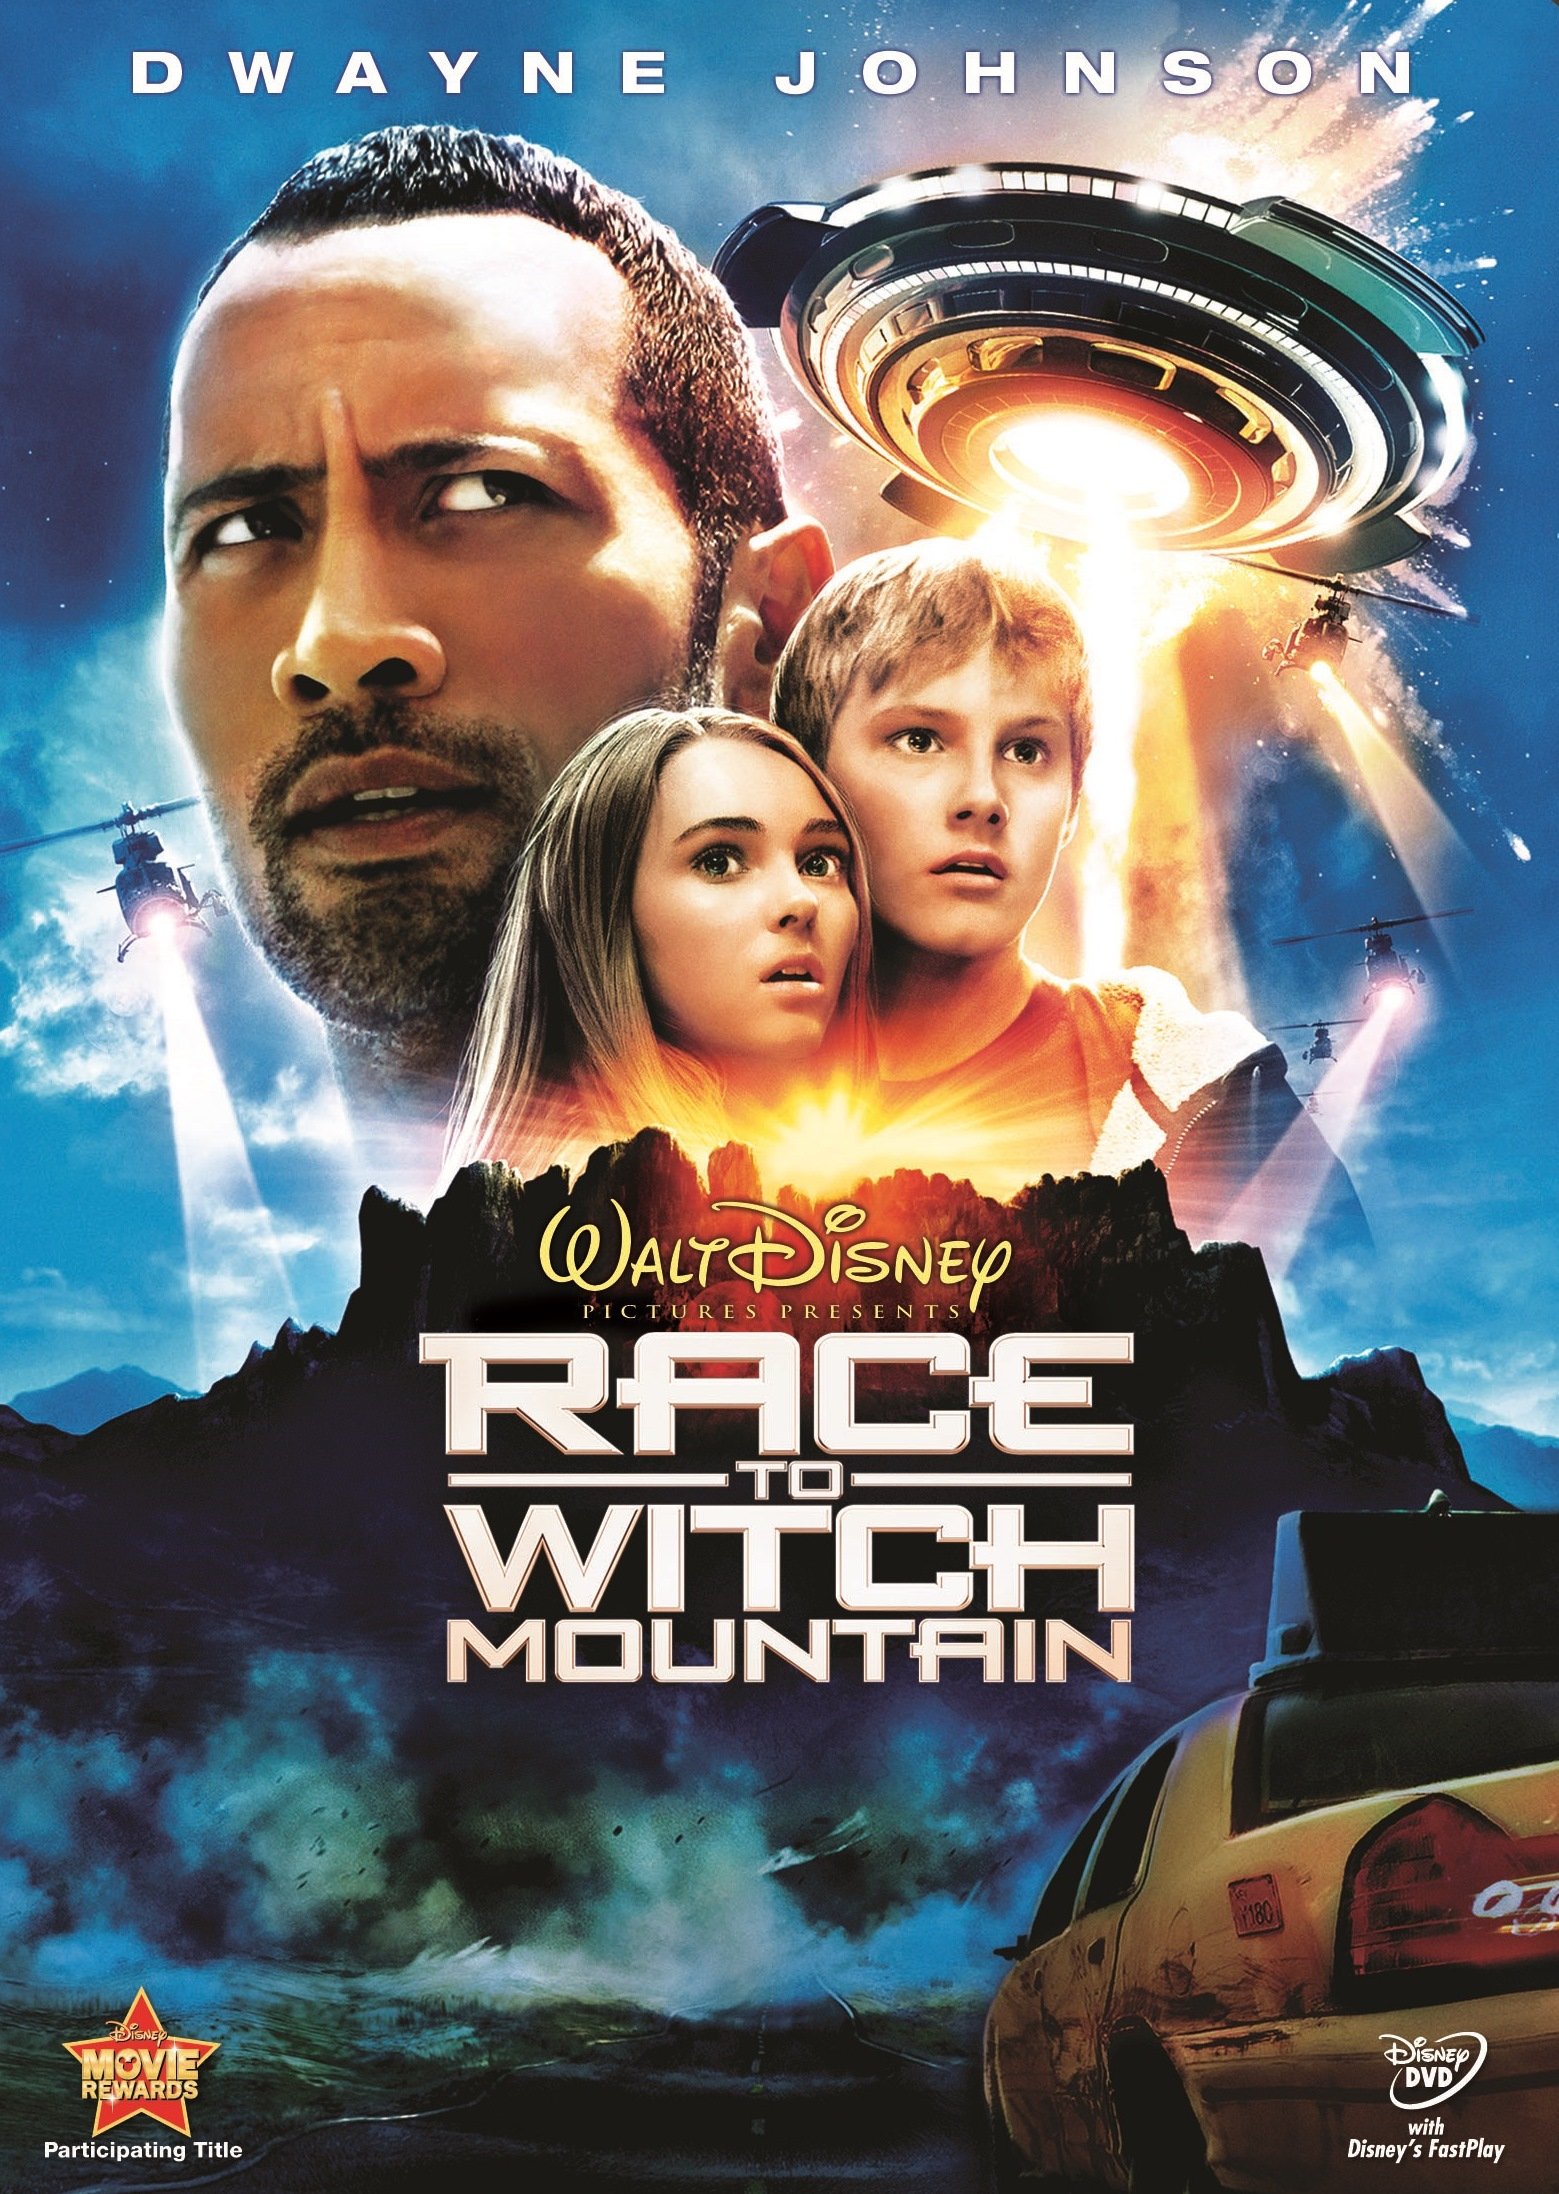 Race to Witch Mountain [Blu-ray] [2009] - Best Buy